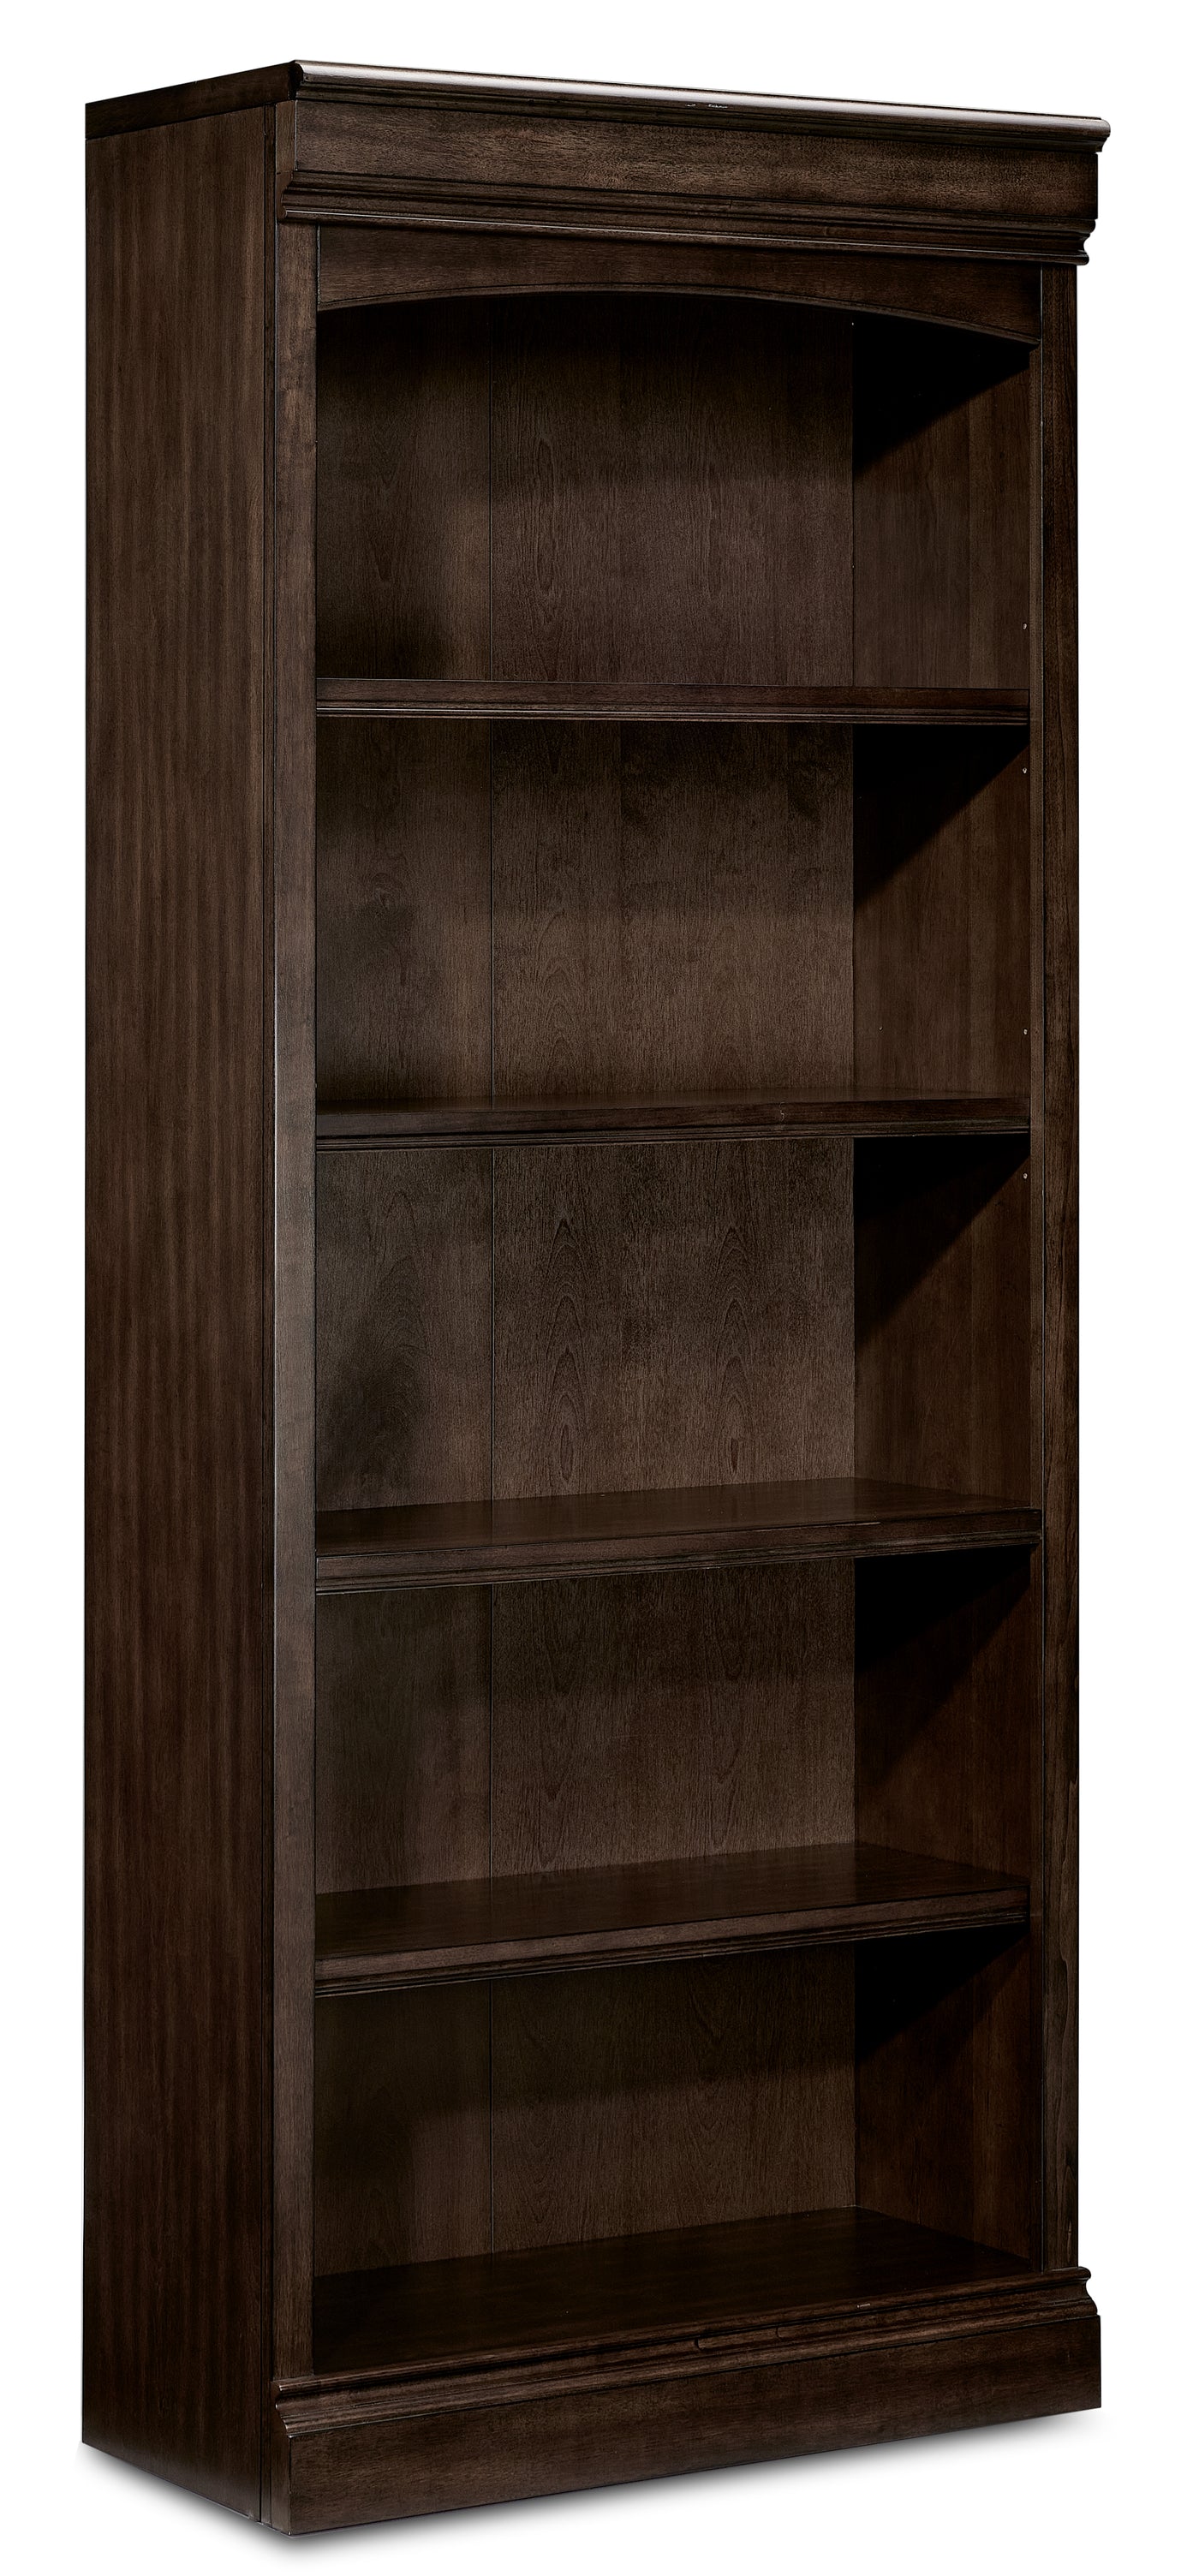 Palomar Open Bookcase - Tuscany Brown